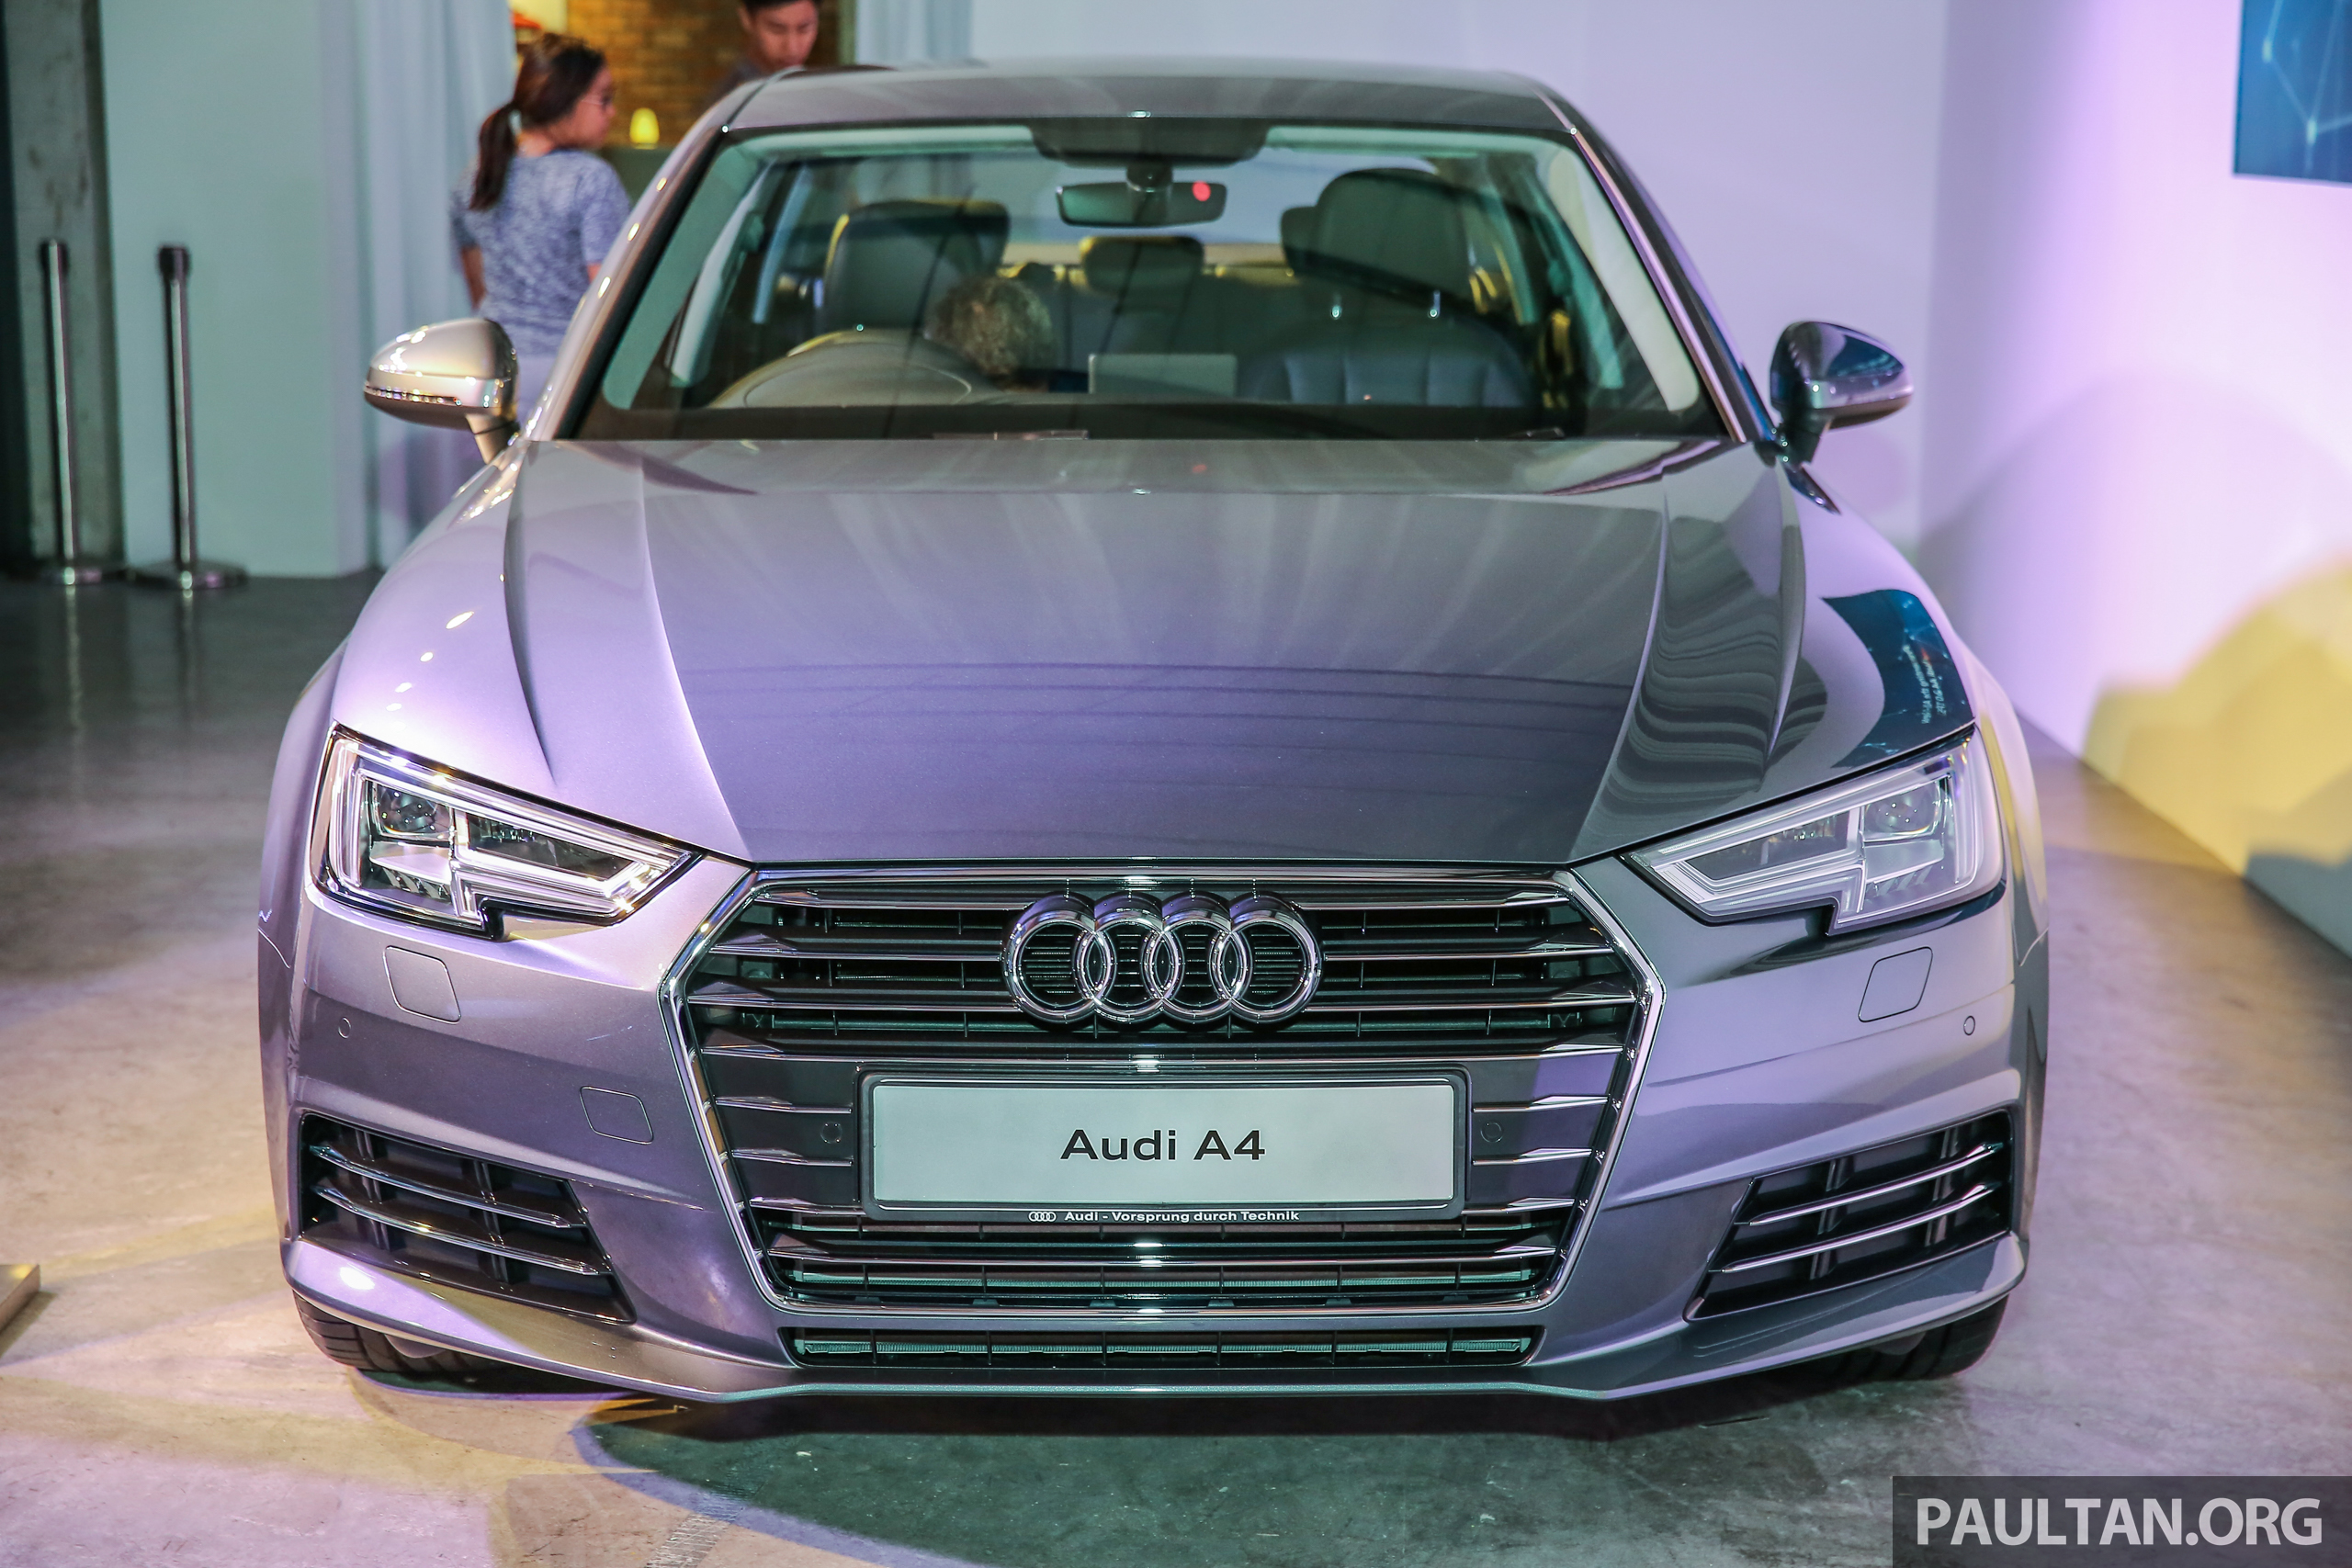 b9-audi-a4-launched-in-malaysia-2-0-tfsi-at-rm240k-audi-b9a4-ext-1